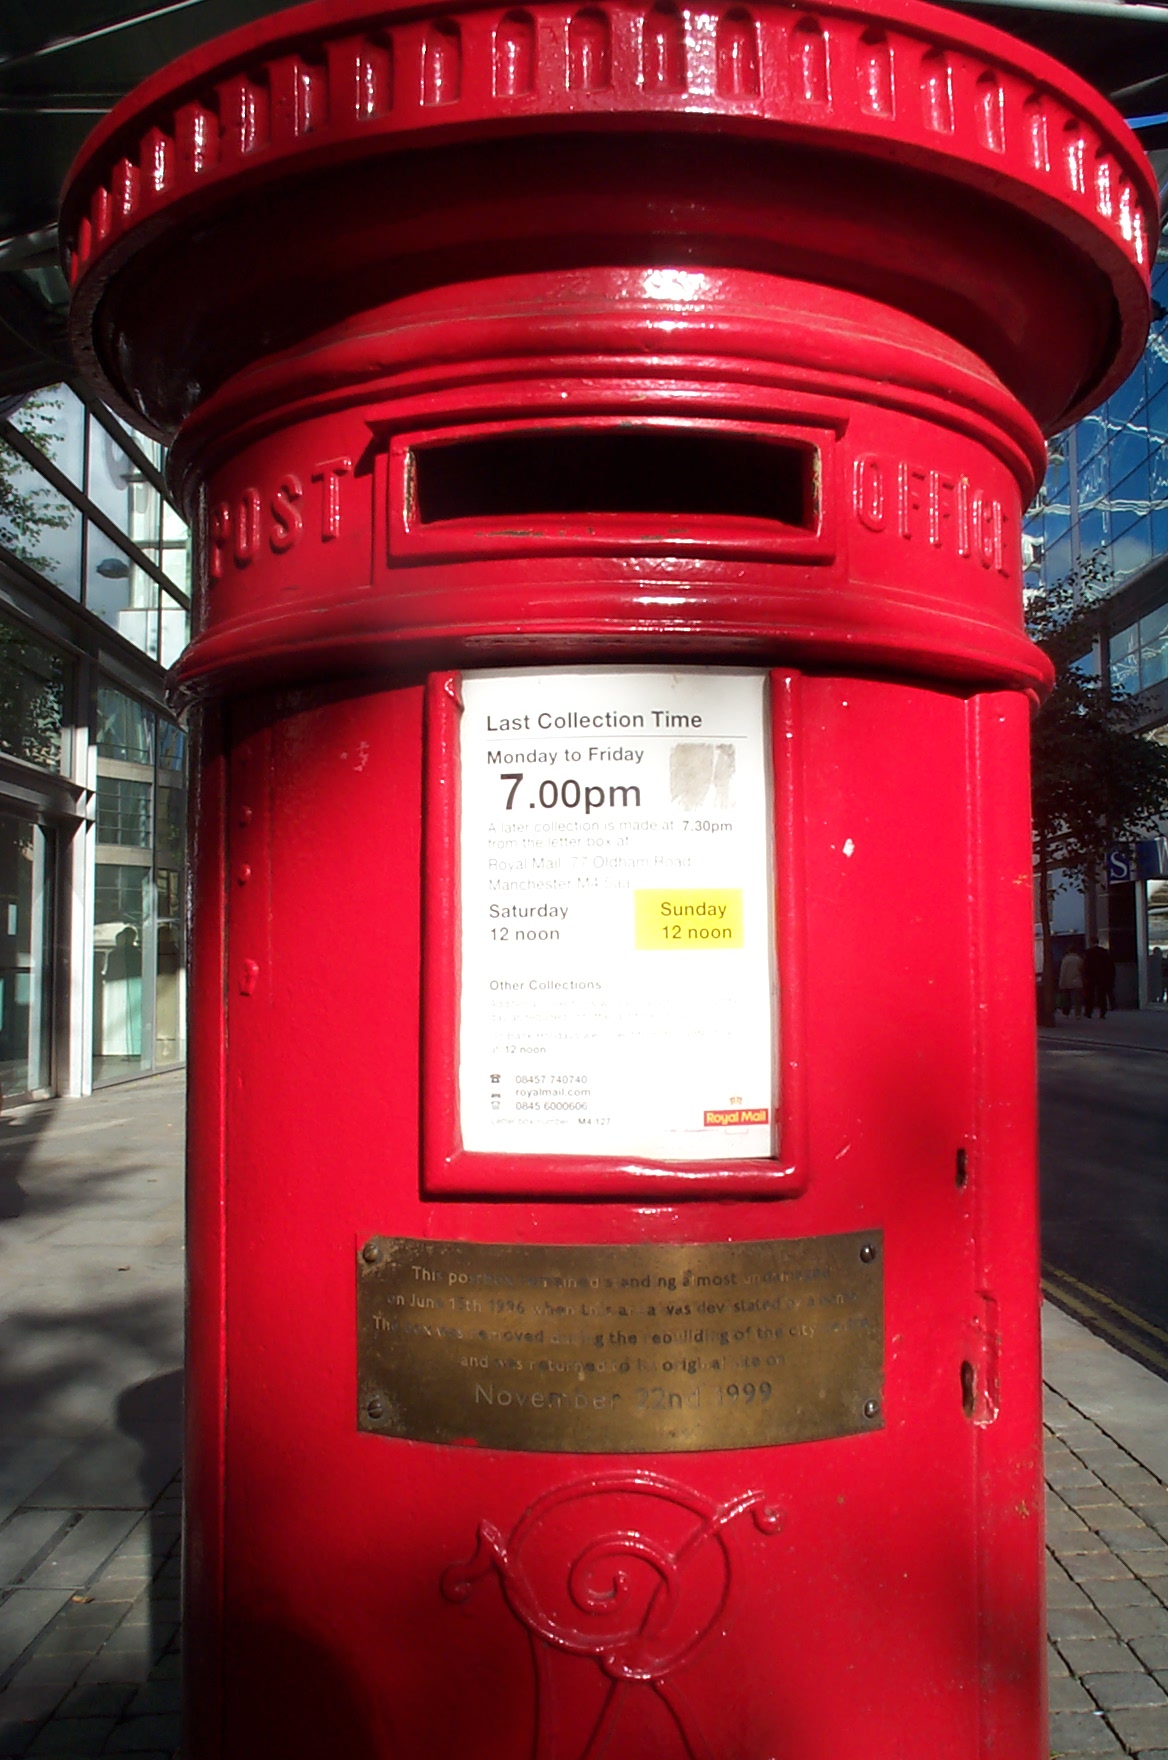 Surviving postbox from the Manchester 1996 IRA Bomb